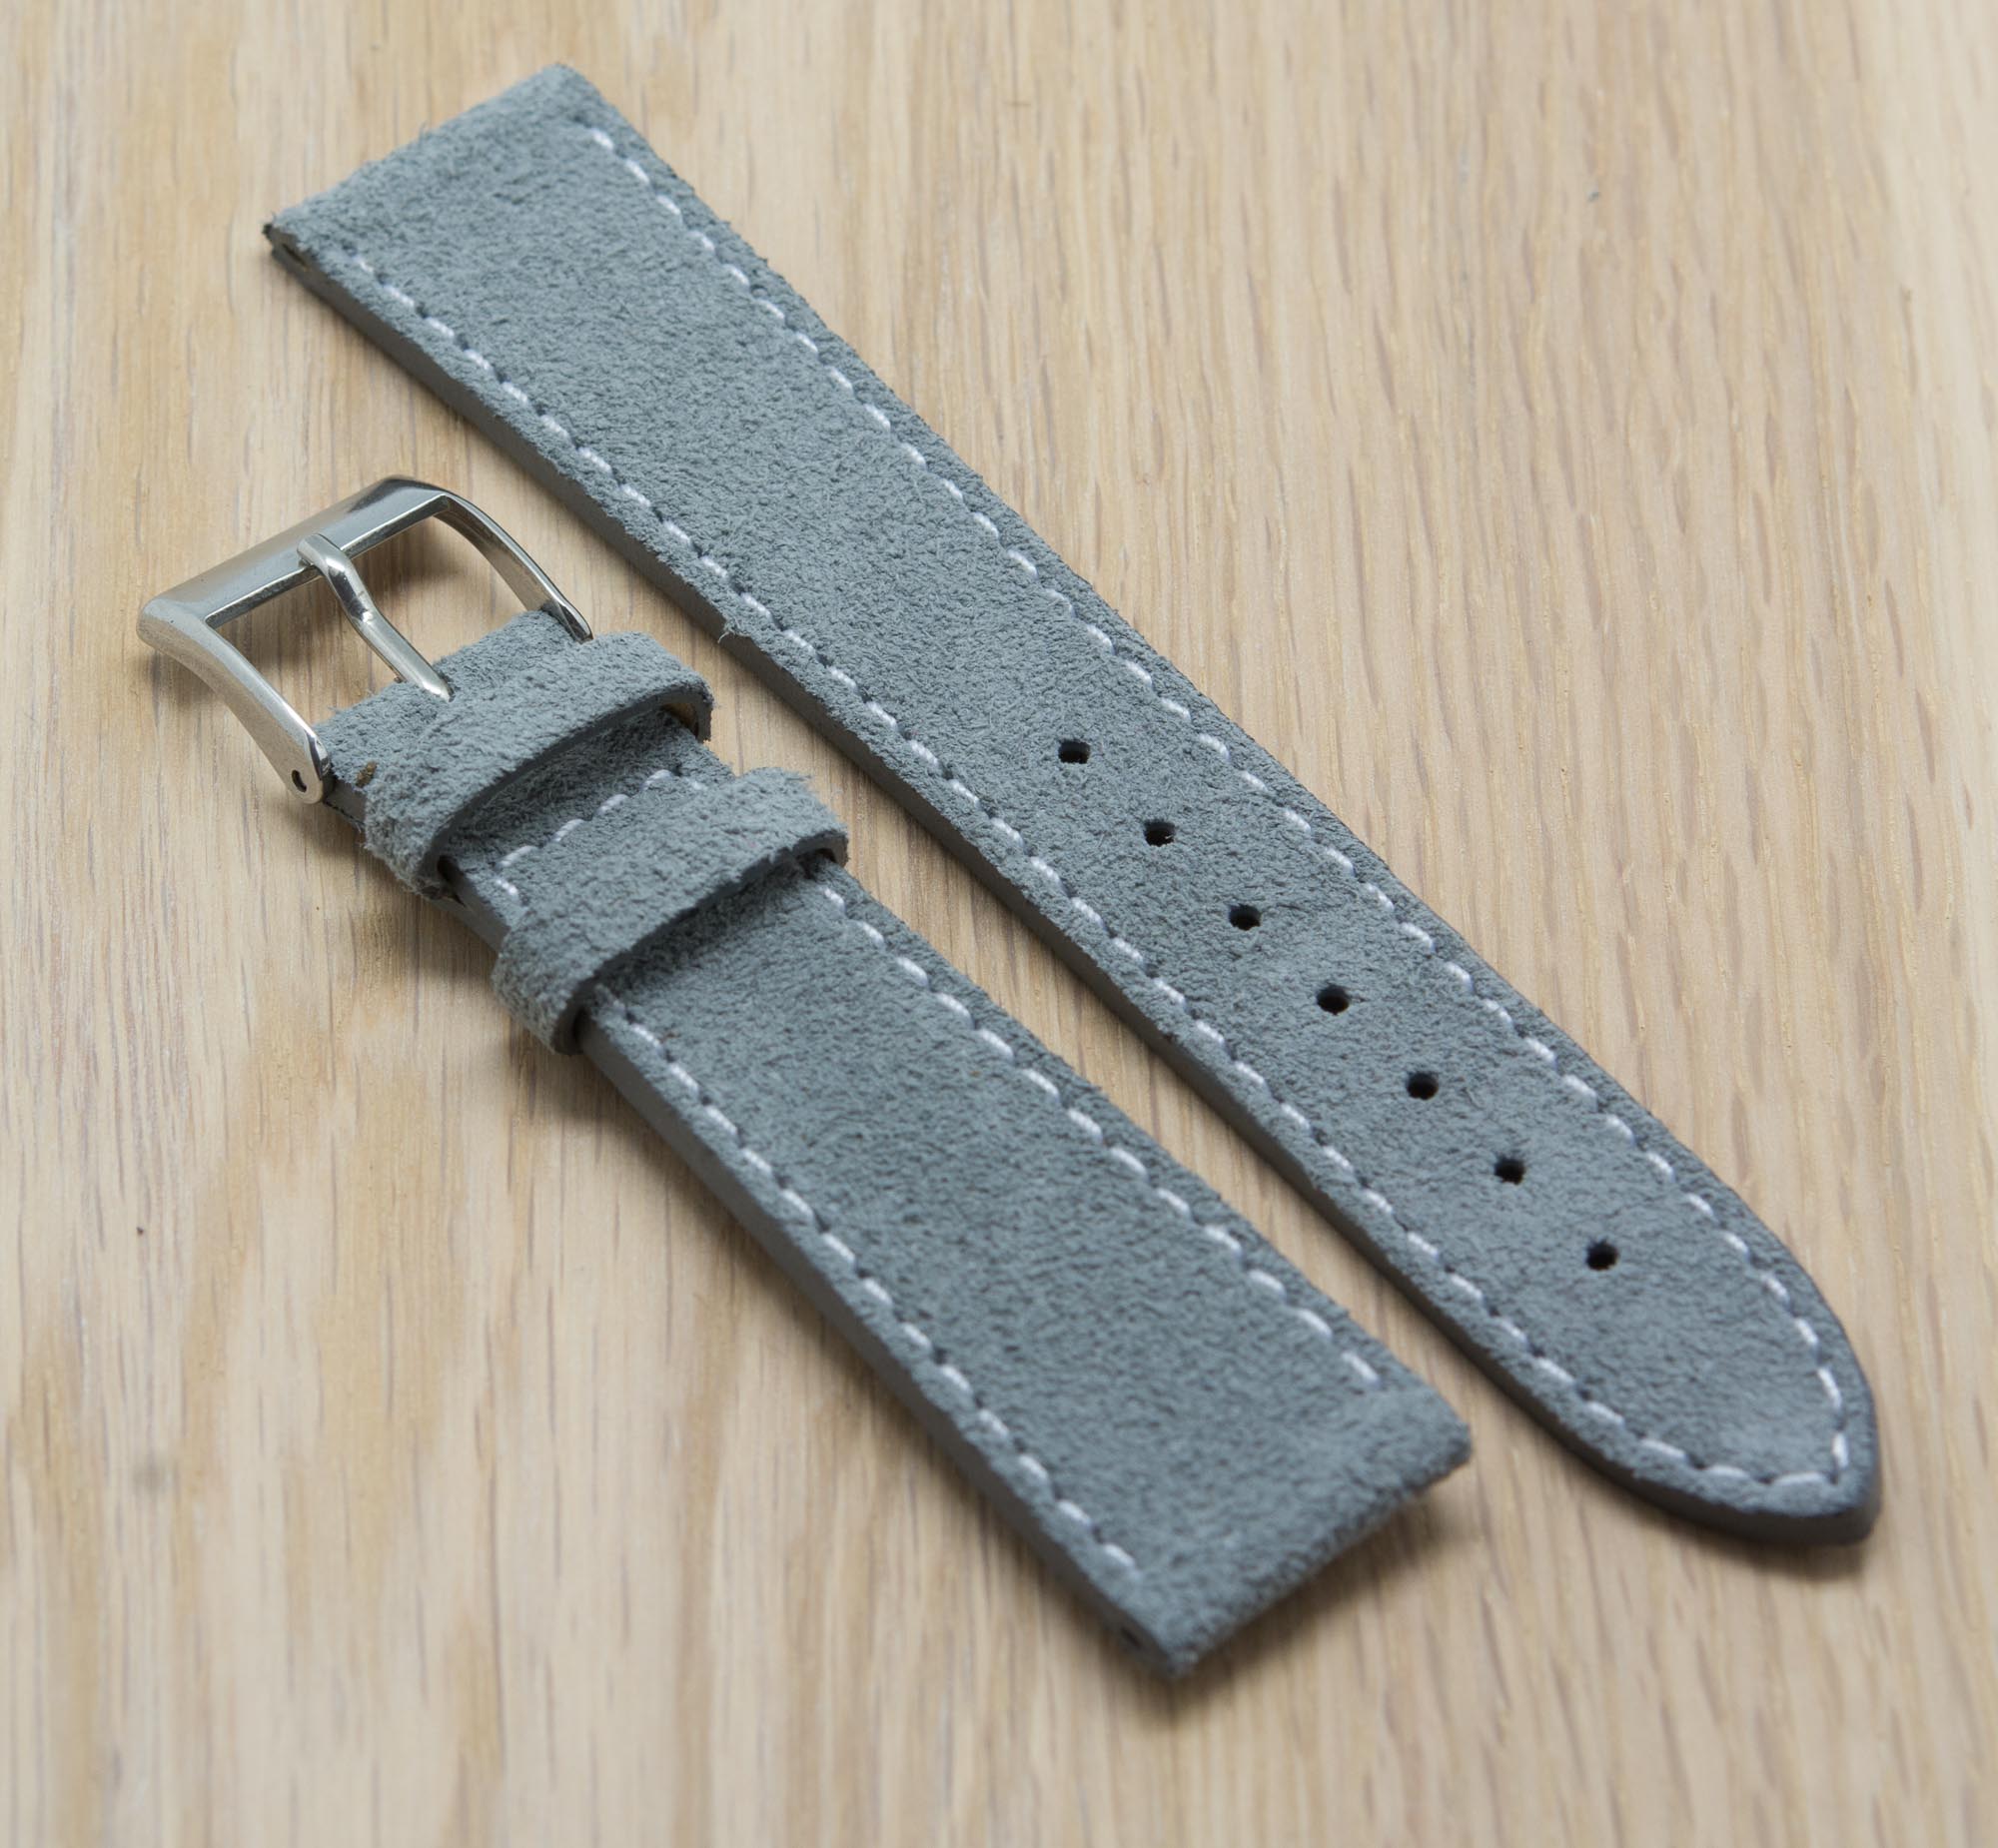 The strap is delivered with a stainless steel buckle. 